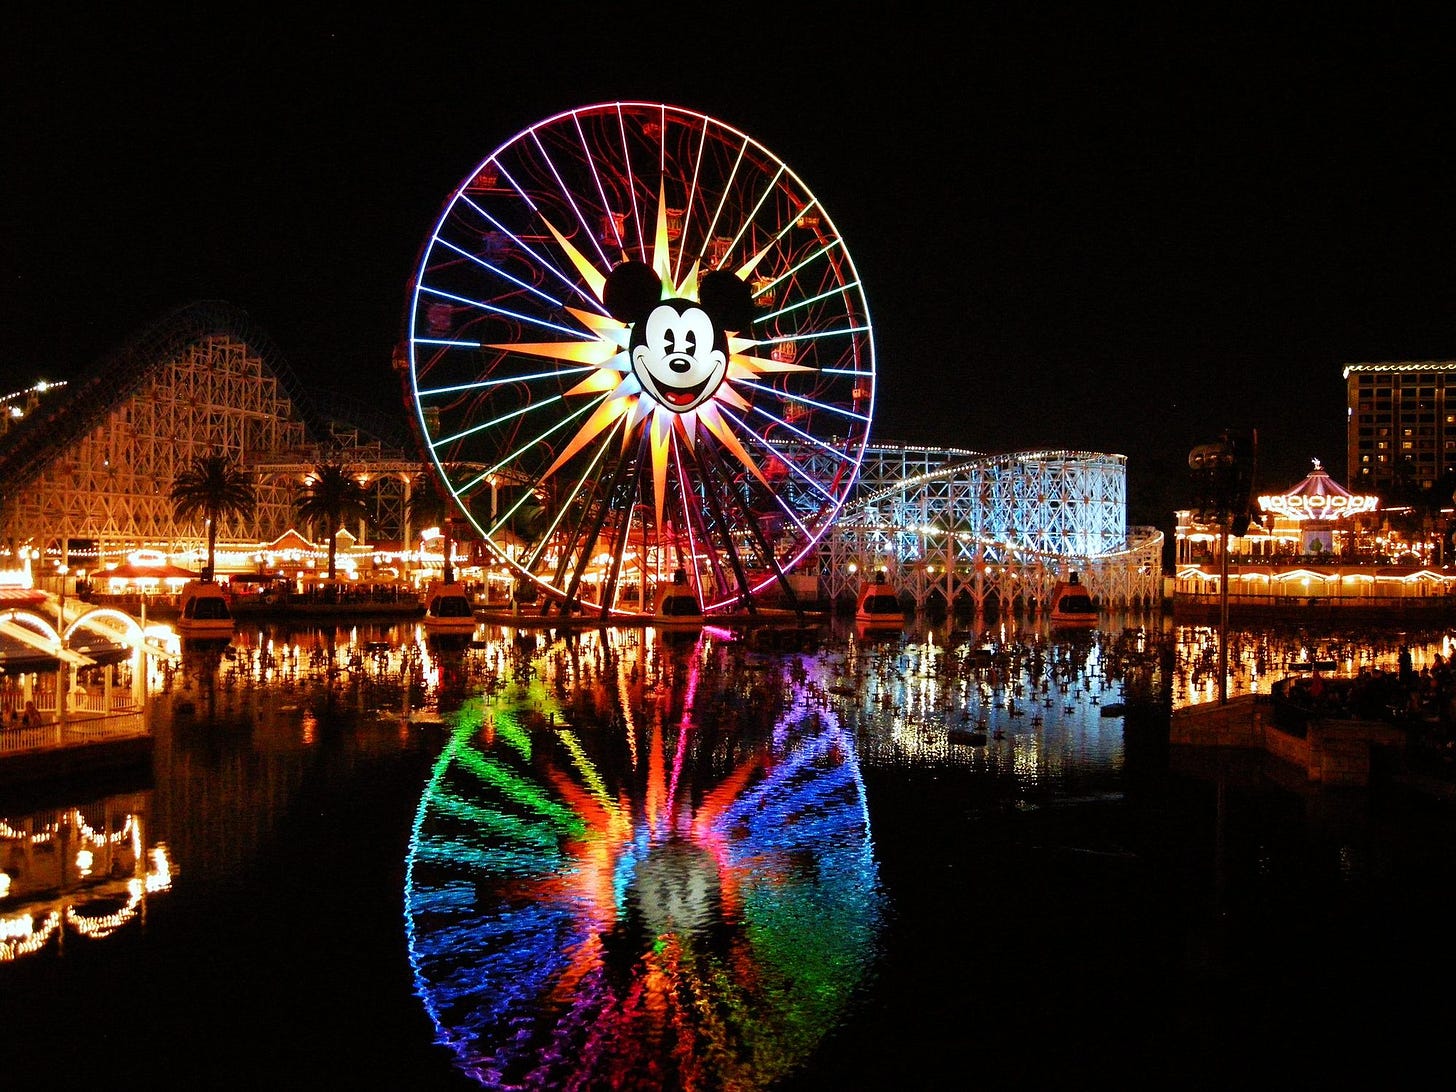 Obscure facts about Disneyland Resort to annoy your family with next time you visit